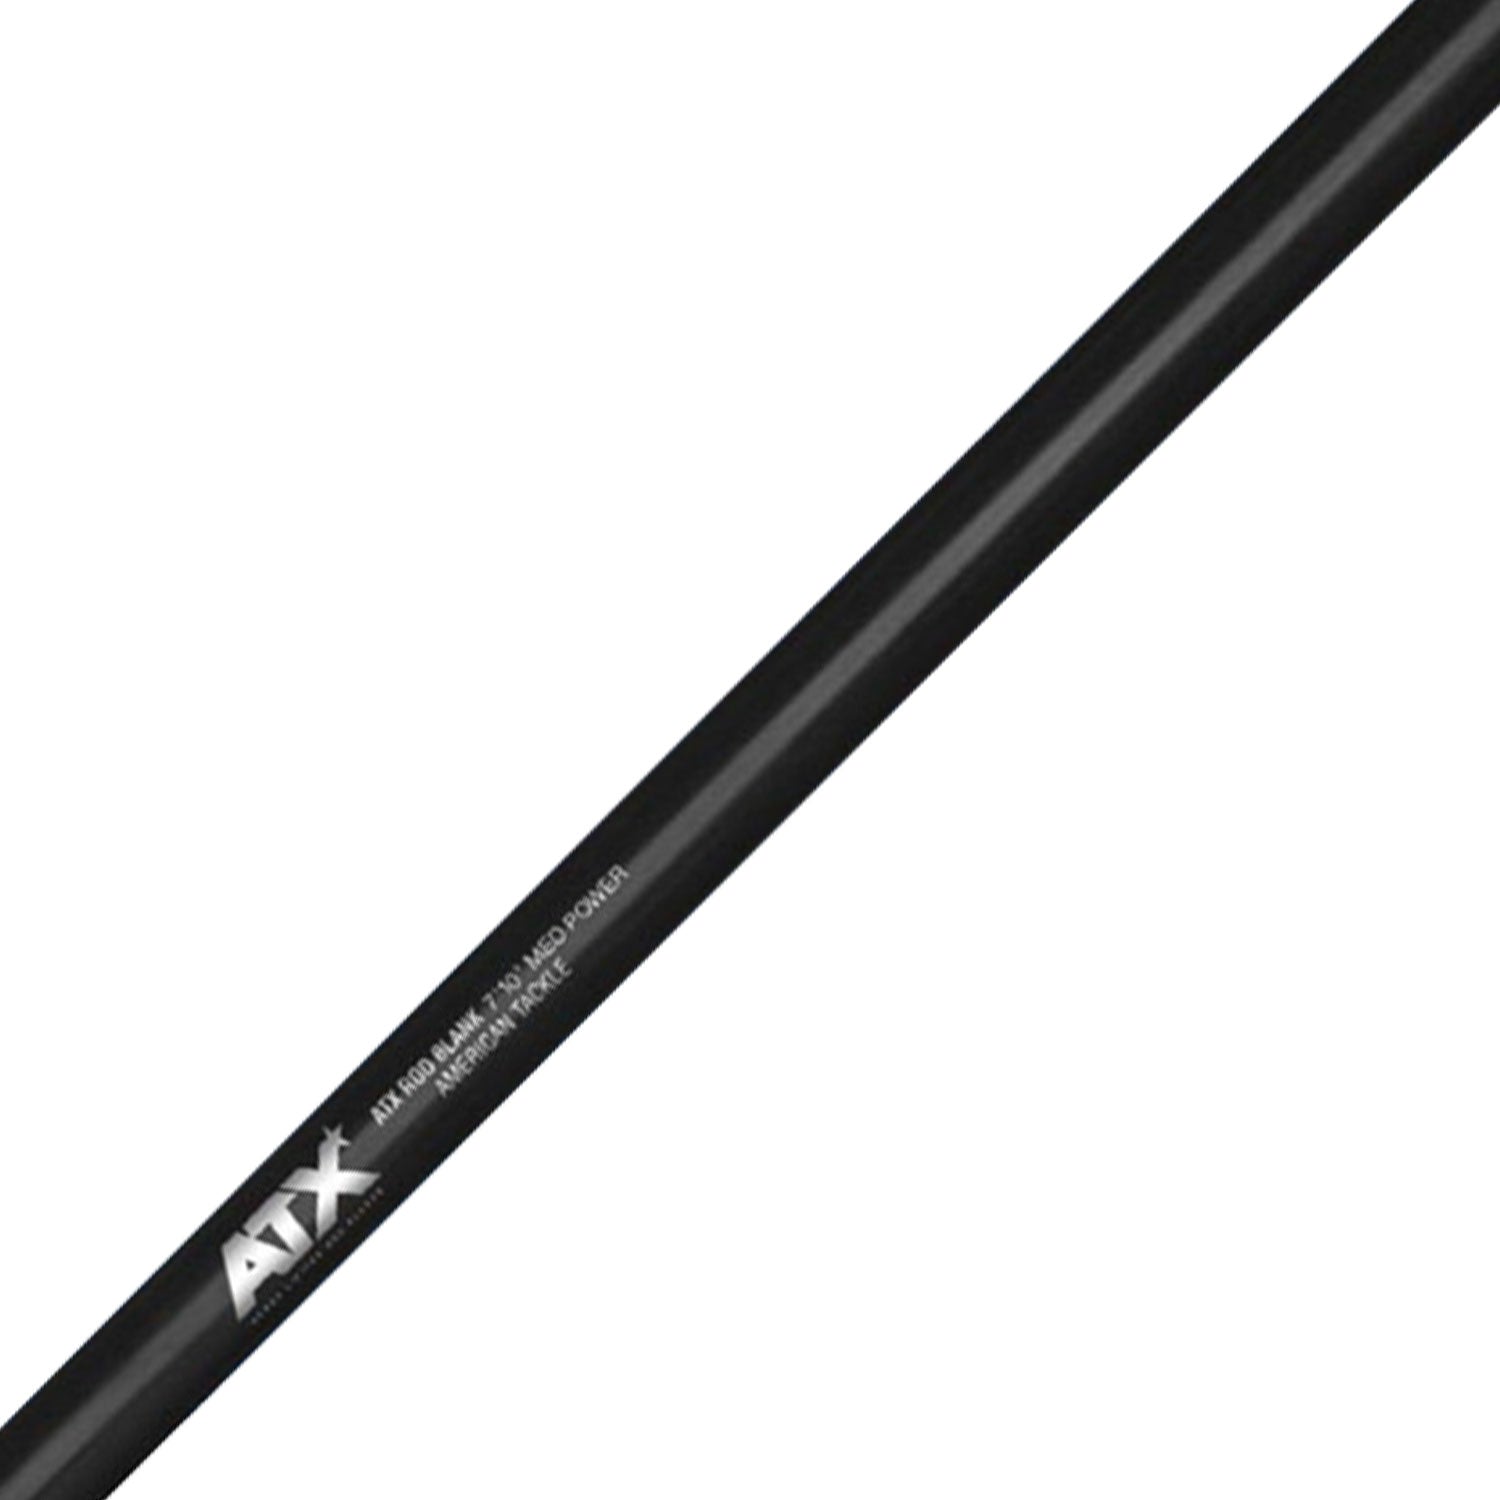 American Tackle AXST50XH Stand-Up Tuna Rod Blank